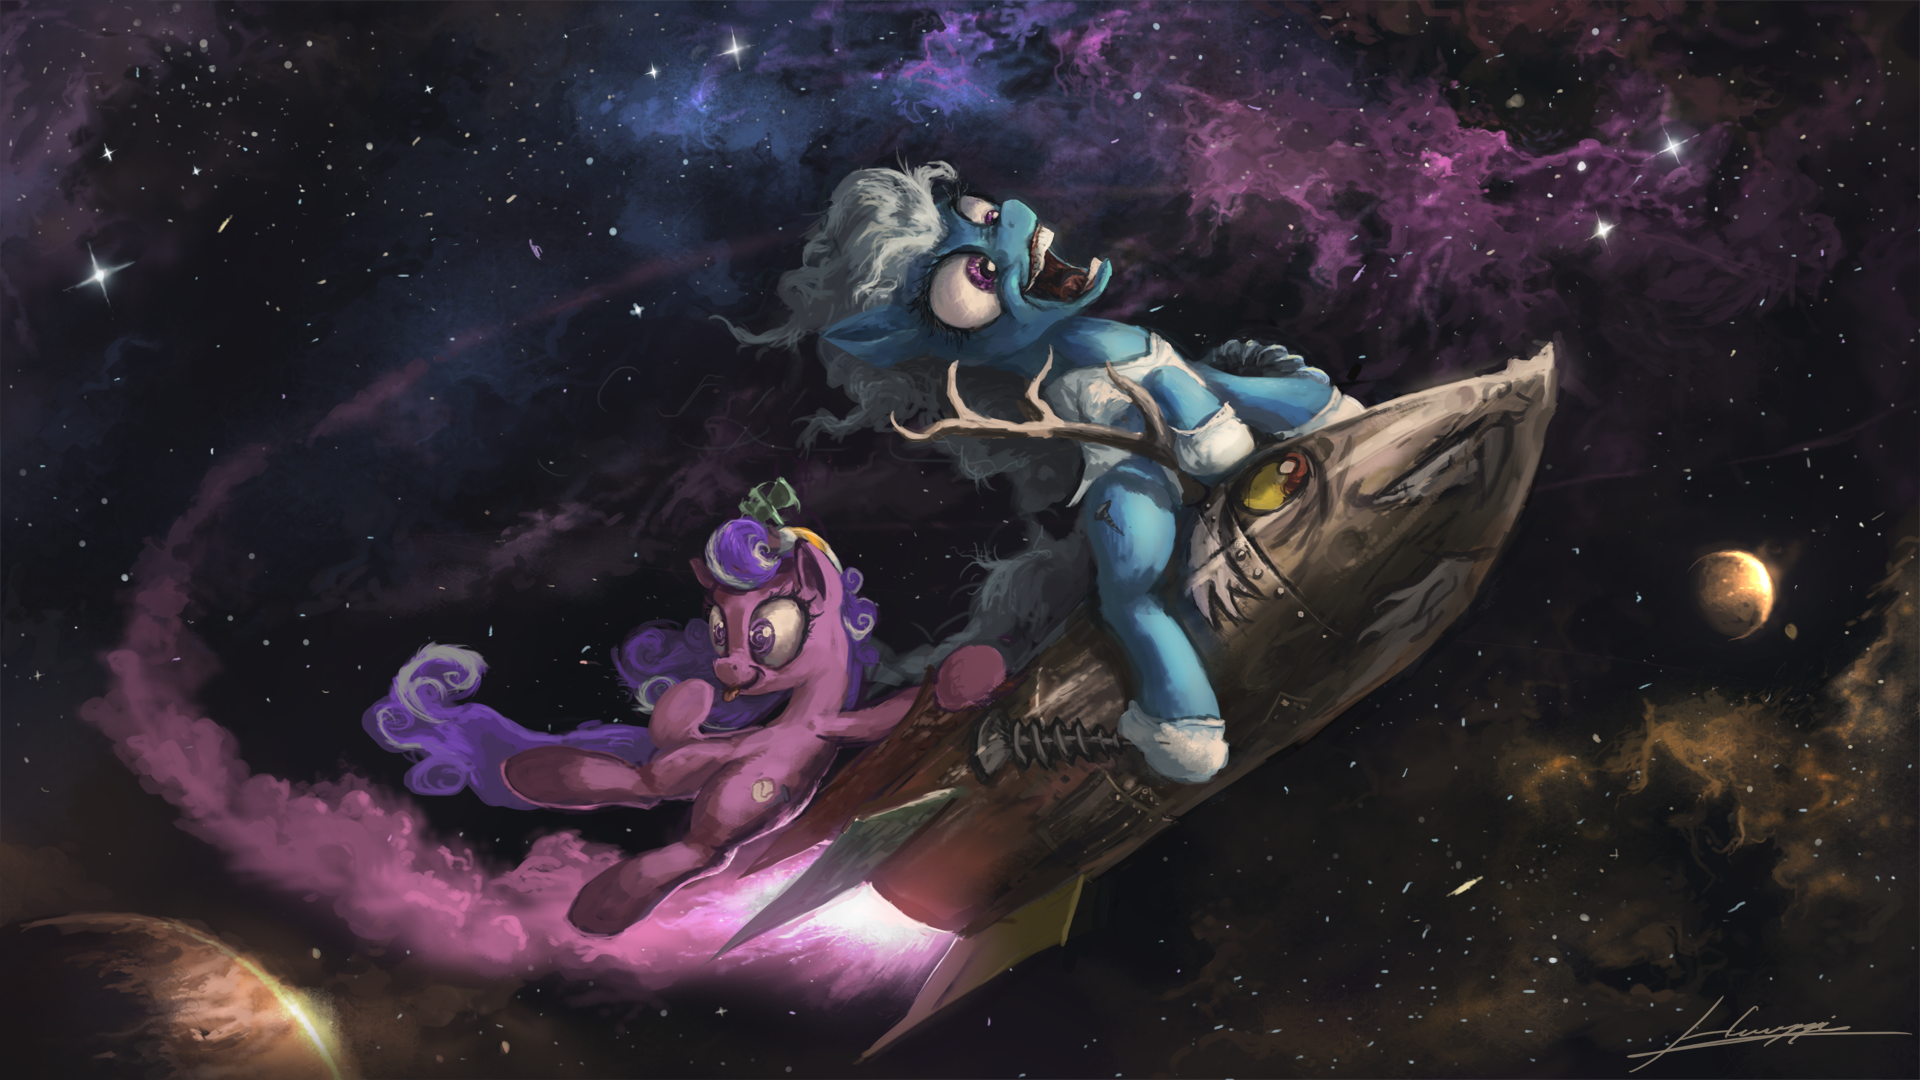 MLP - Rocket Ride! by Huussii